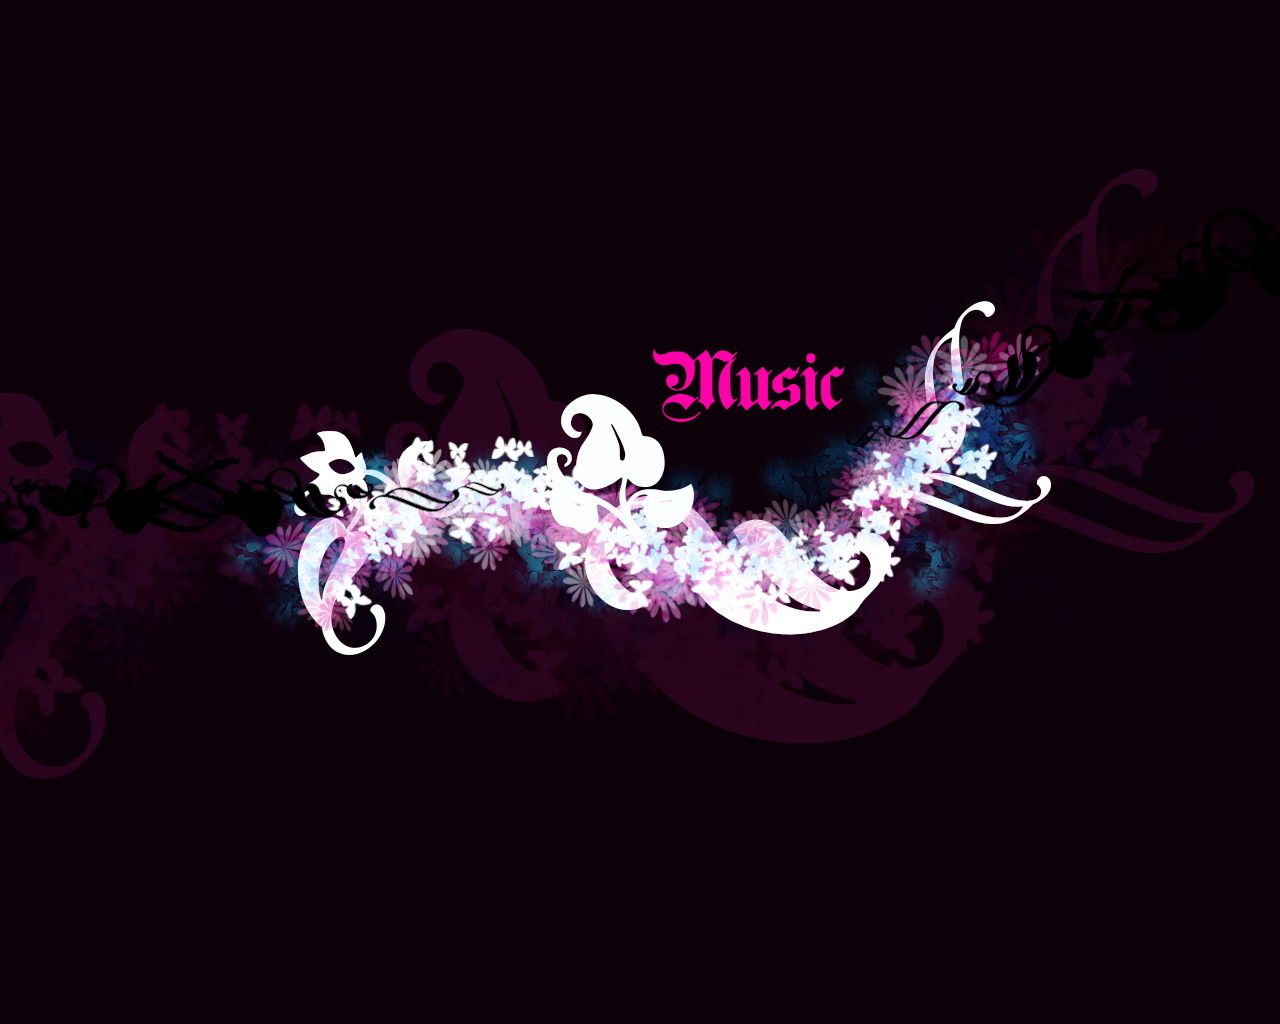 music Wallpaper   Christian Wallpapers and Backgrounds